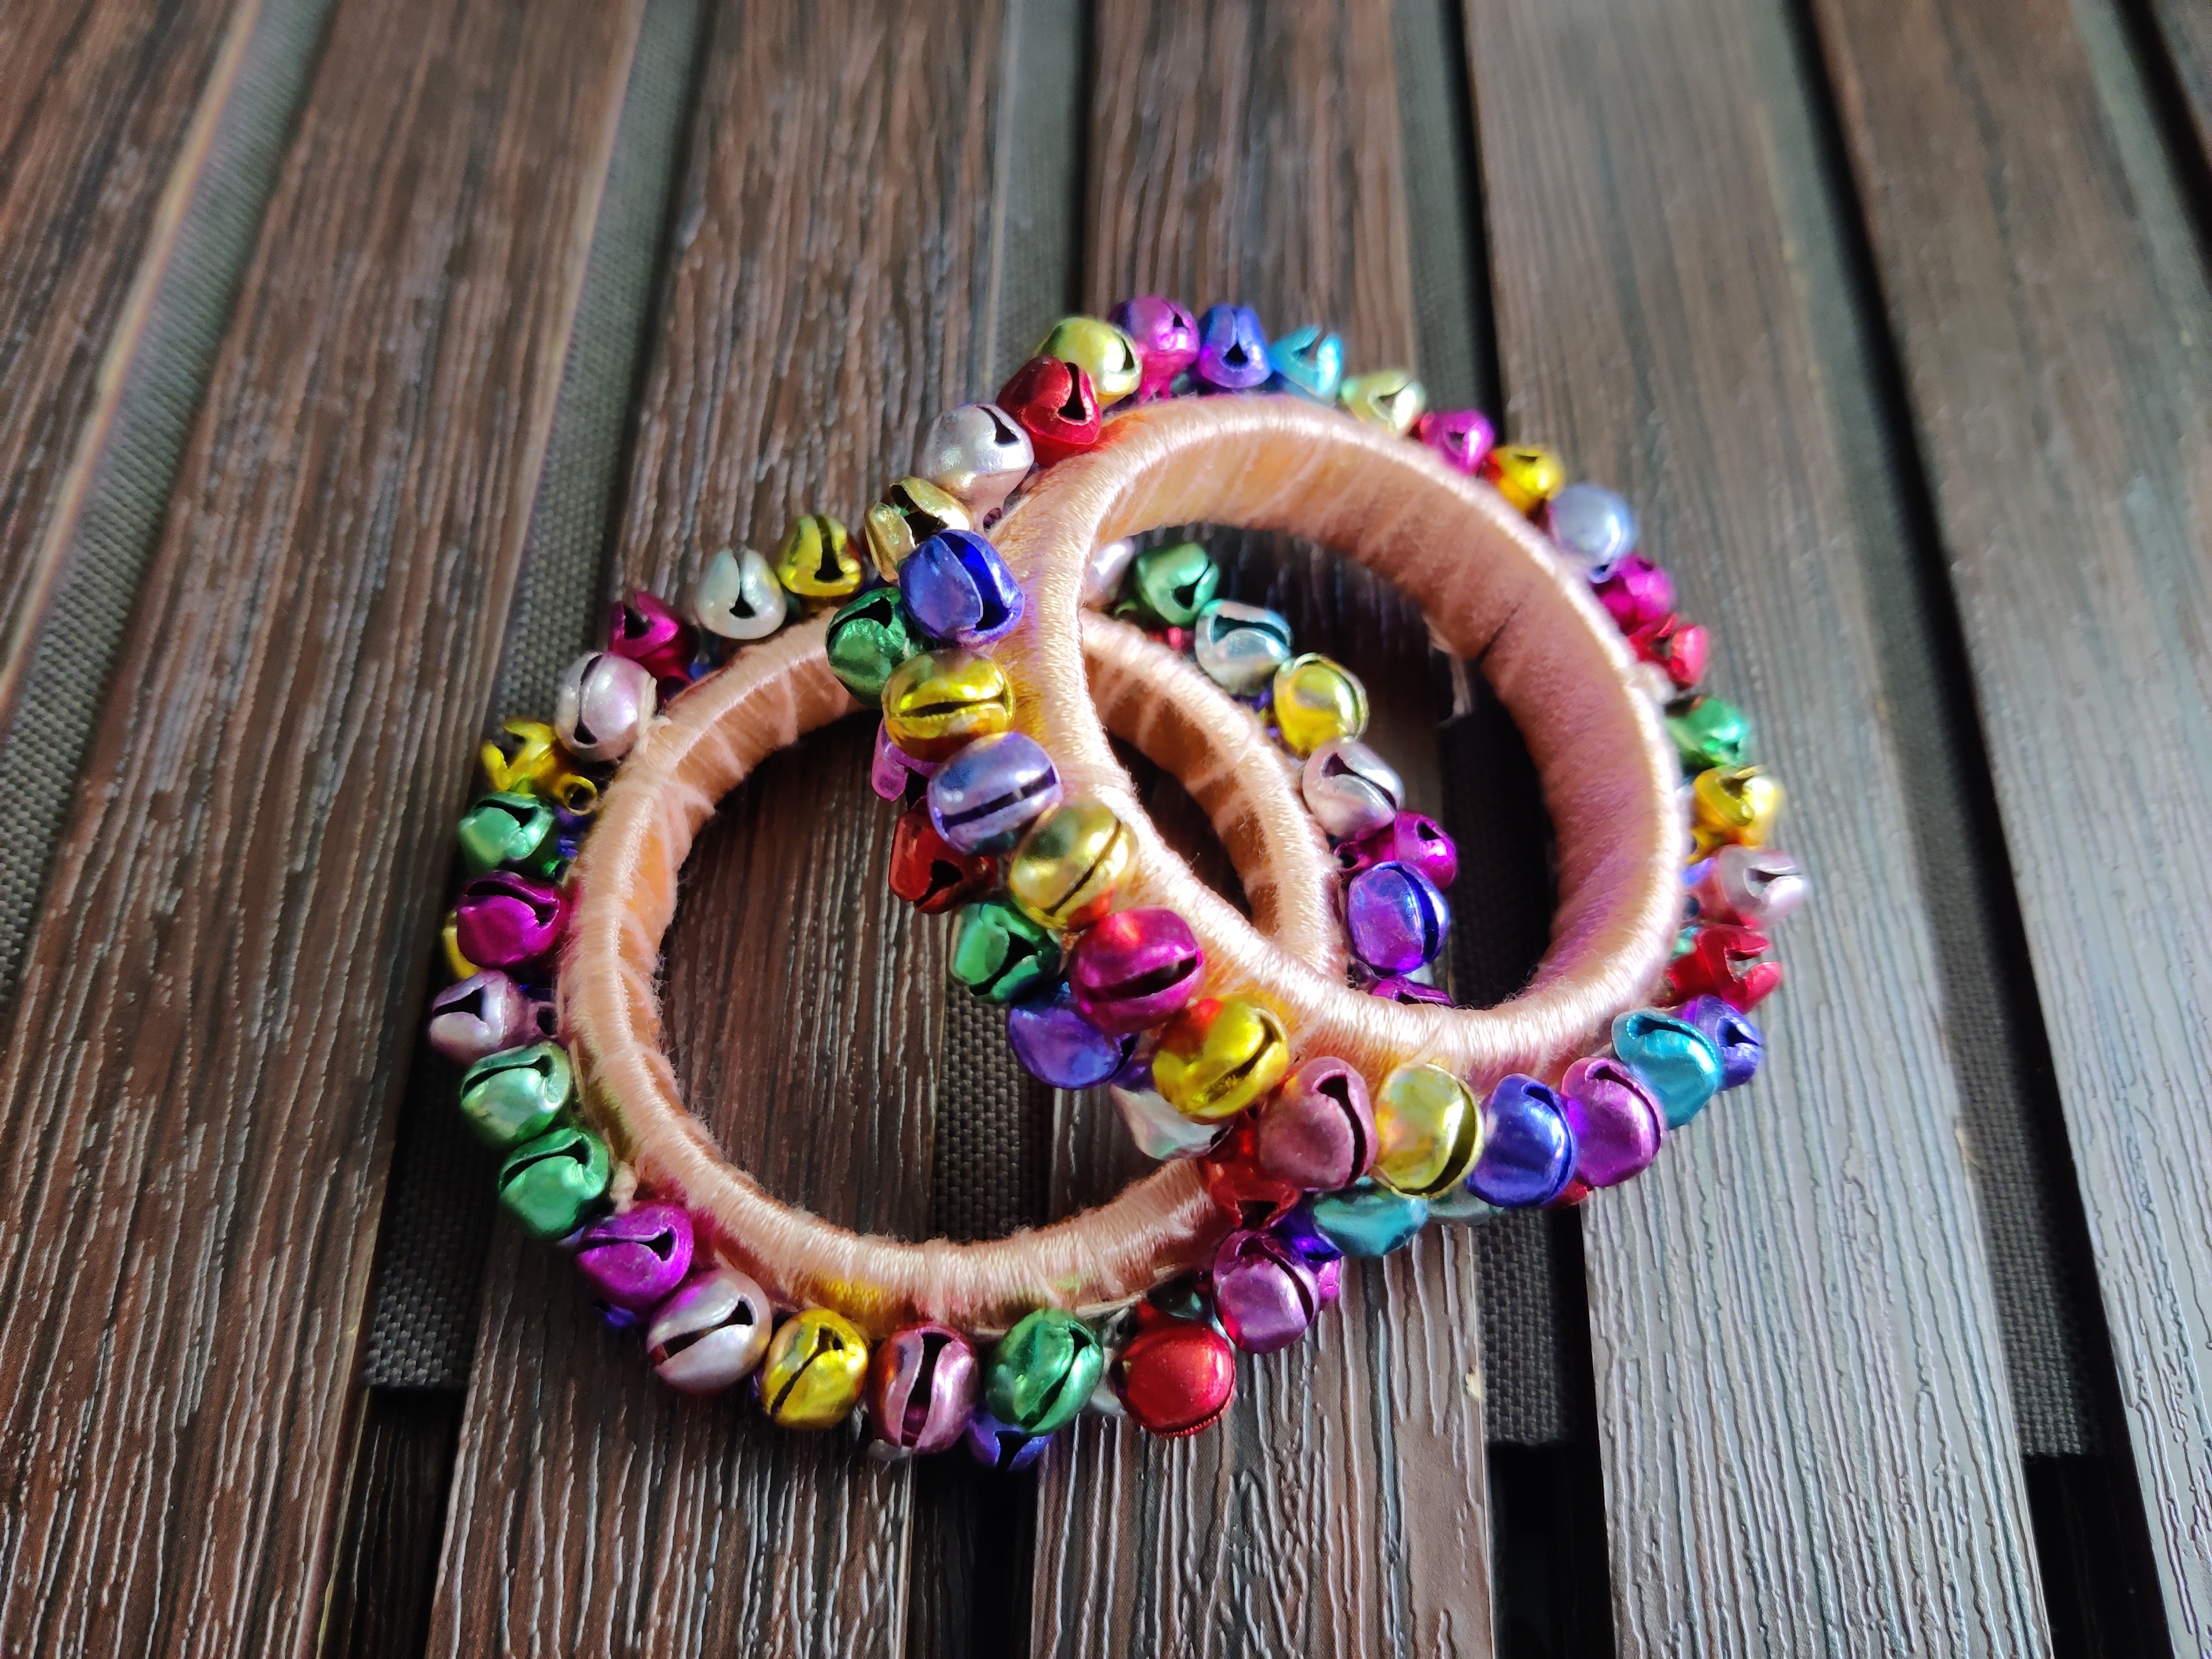 Handcrafted Bangles - P&S Company